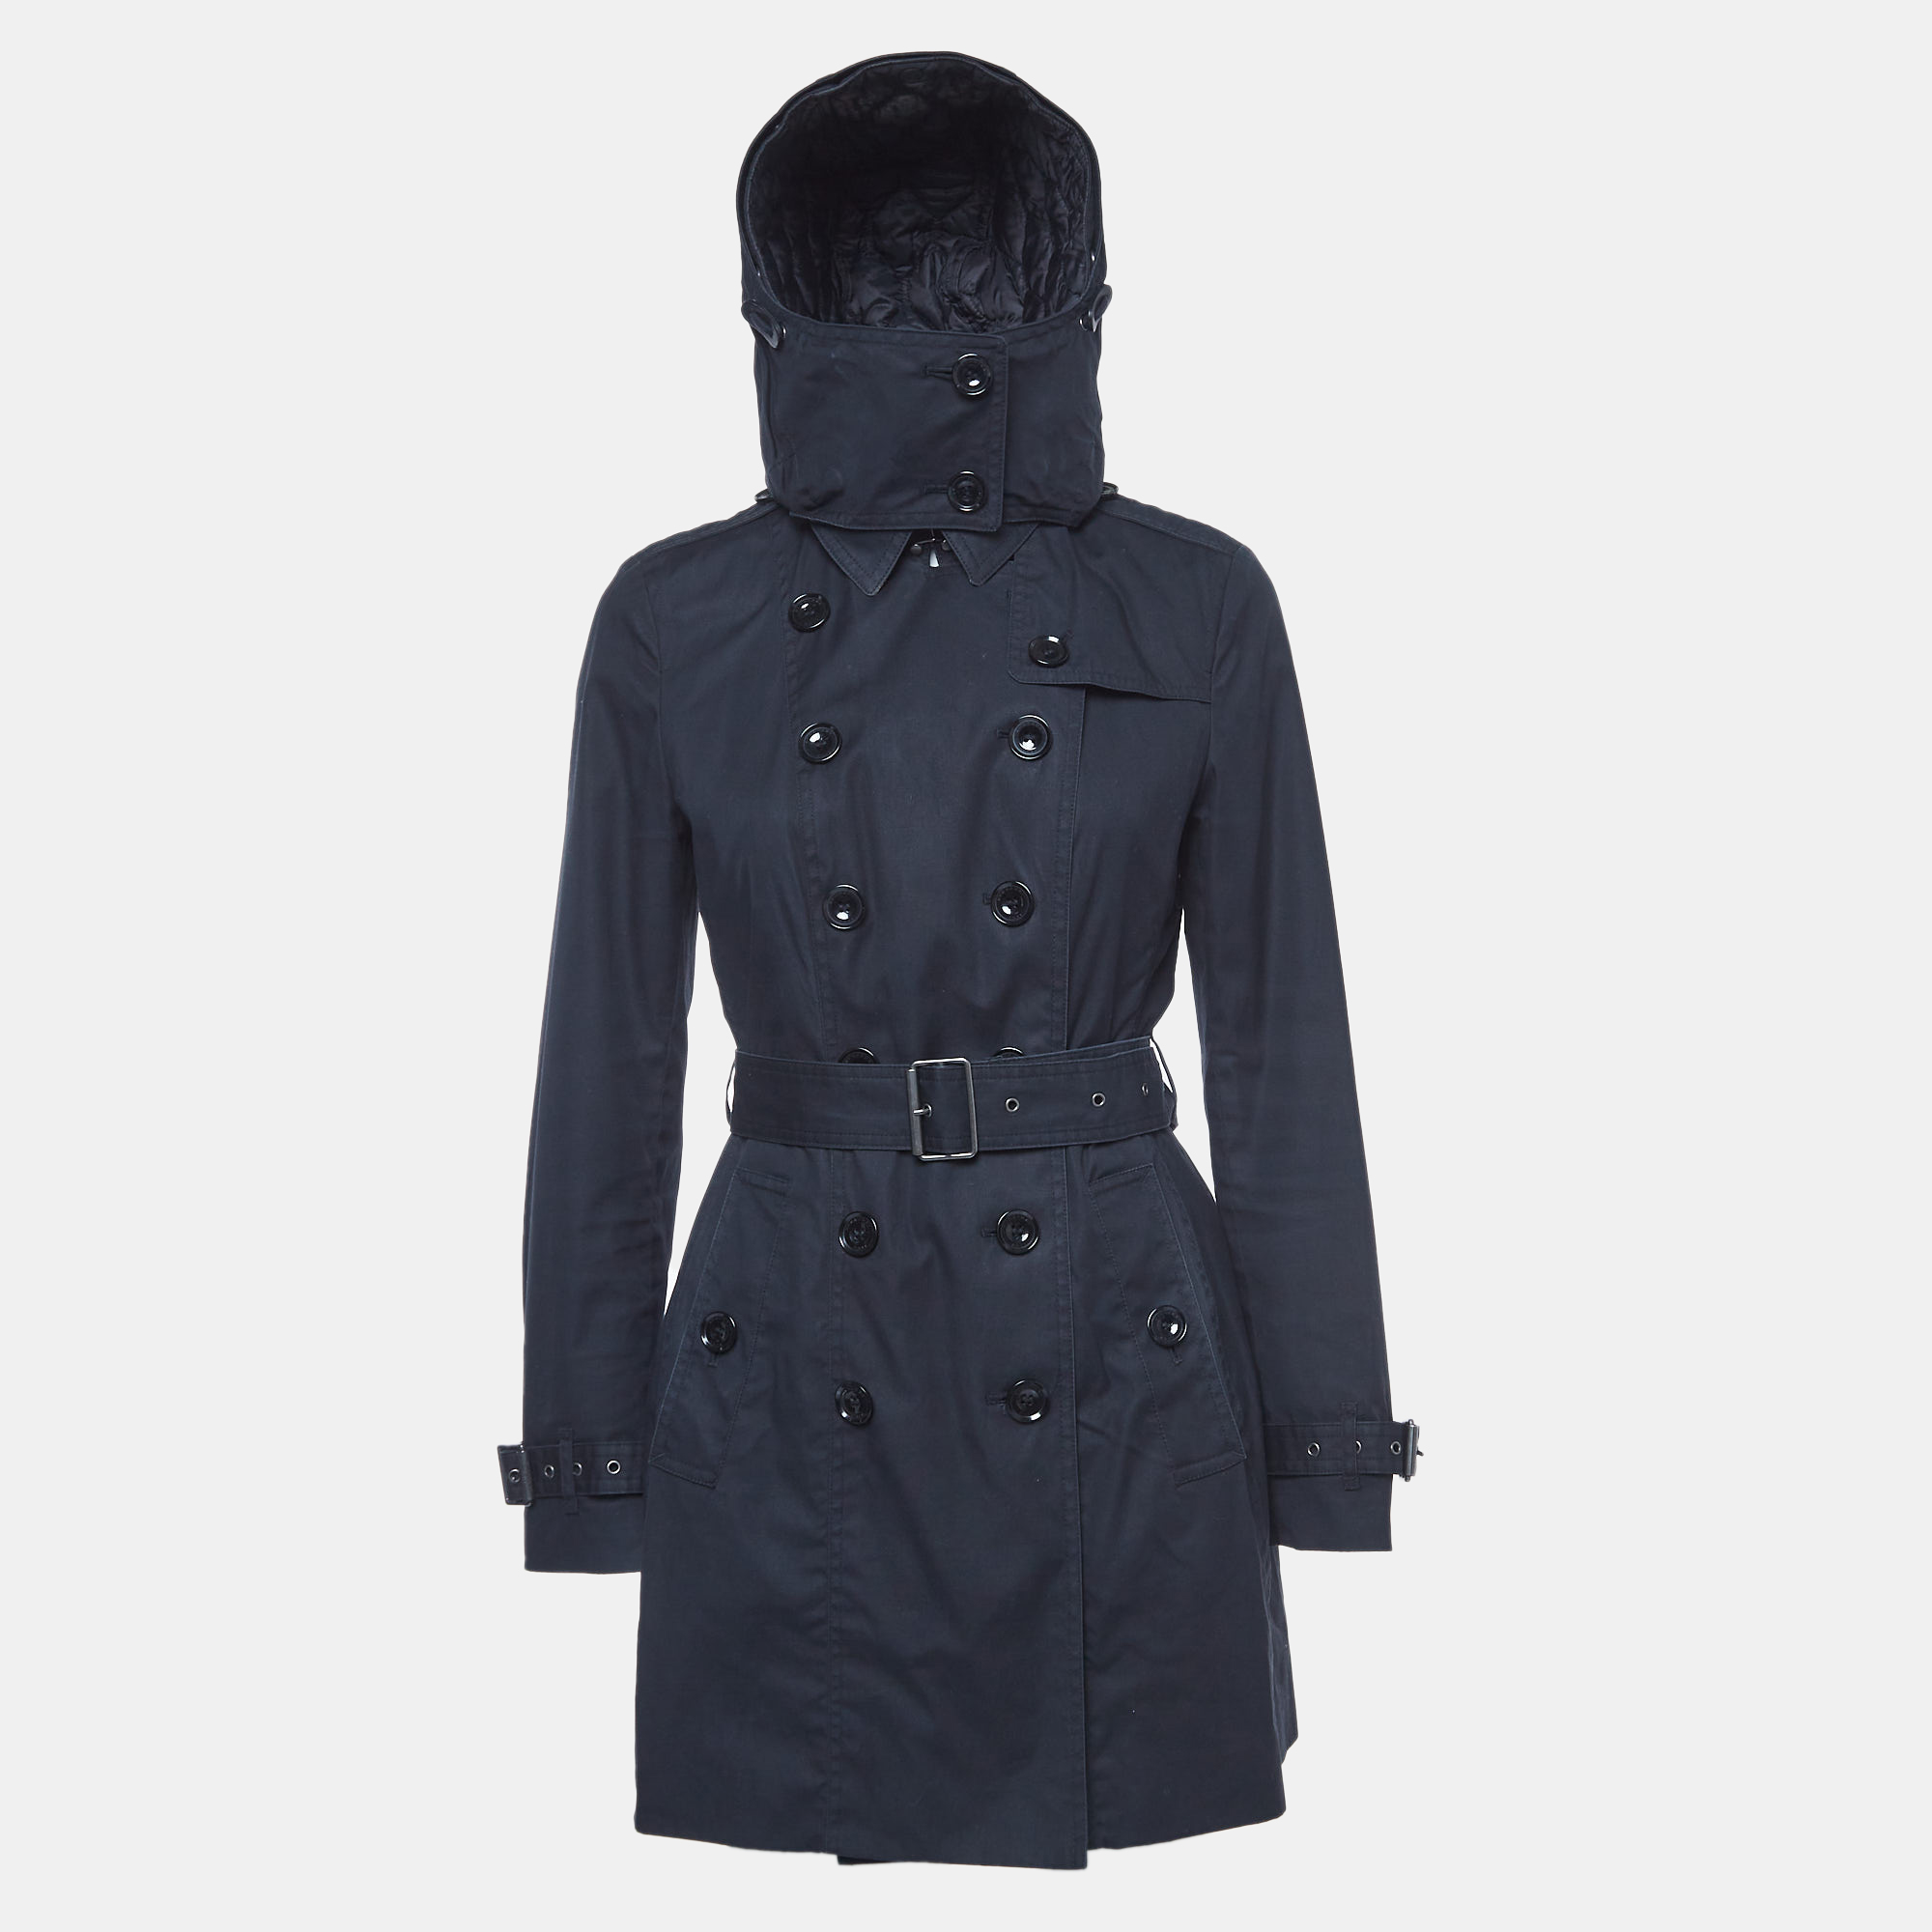 Burberry Brit Navy Blue Double Breasted Trench Coat S